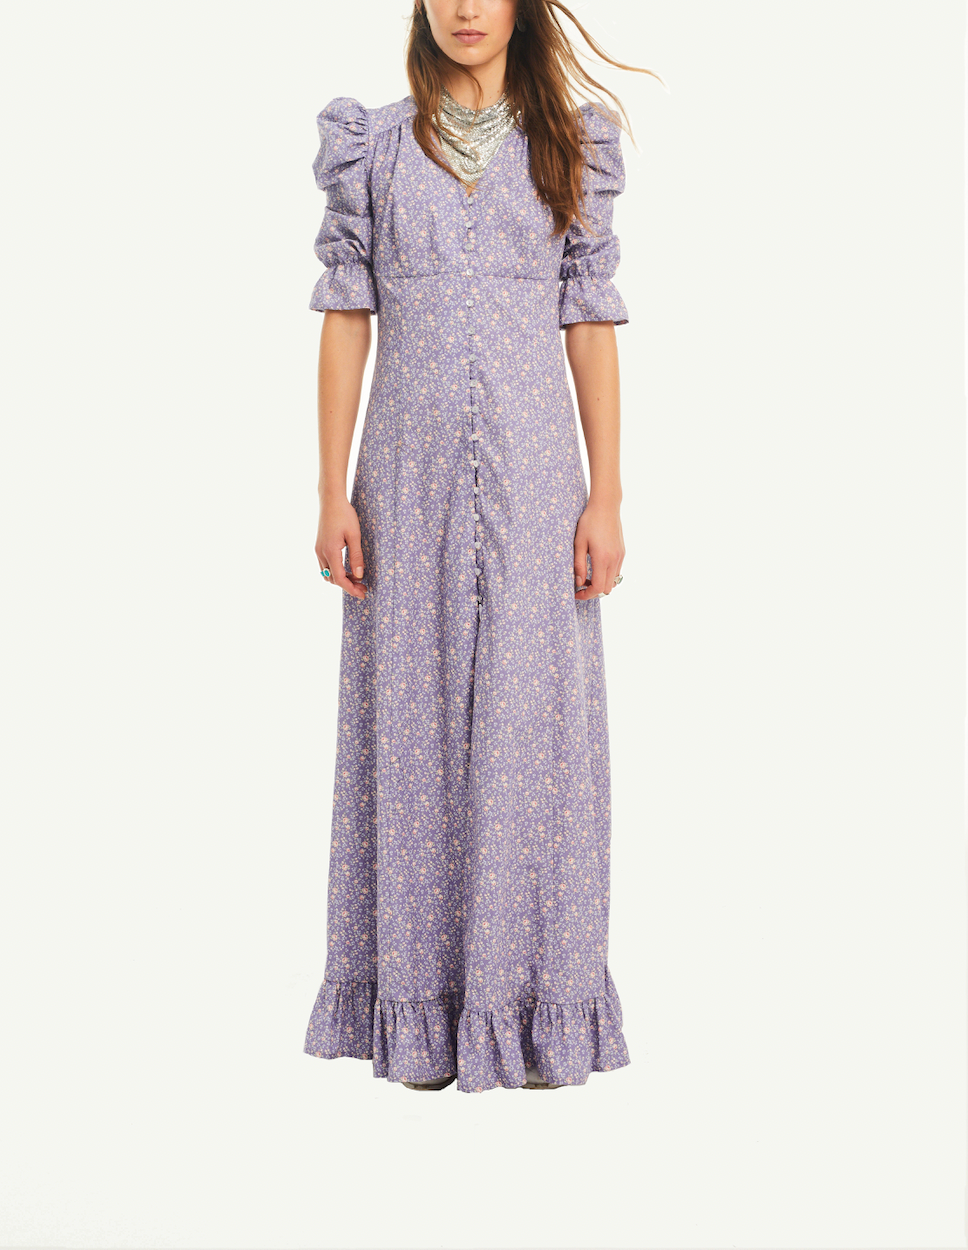 GIGLIO - long Versailles patterned cotton dress